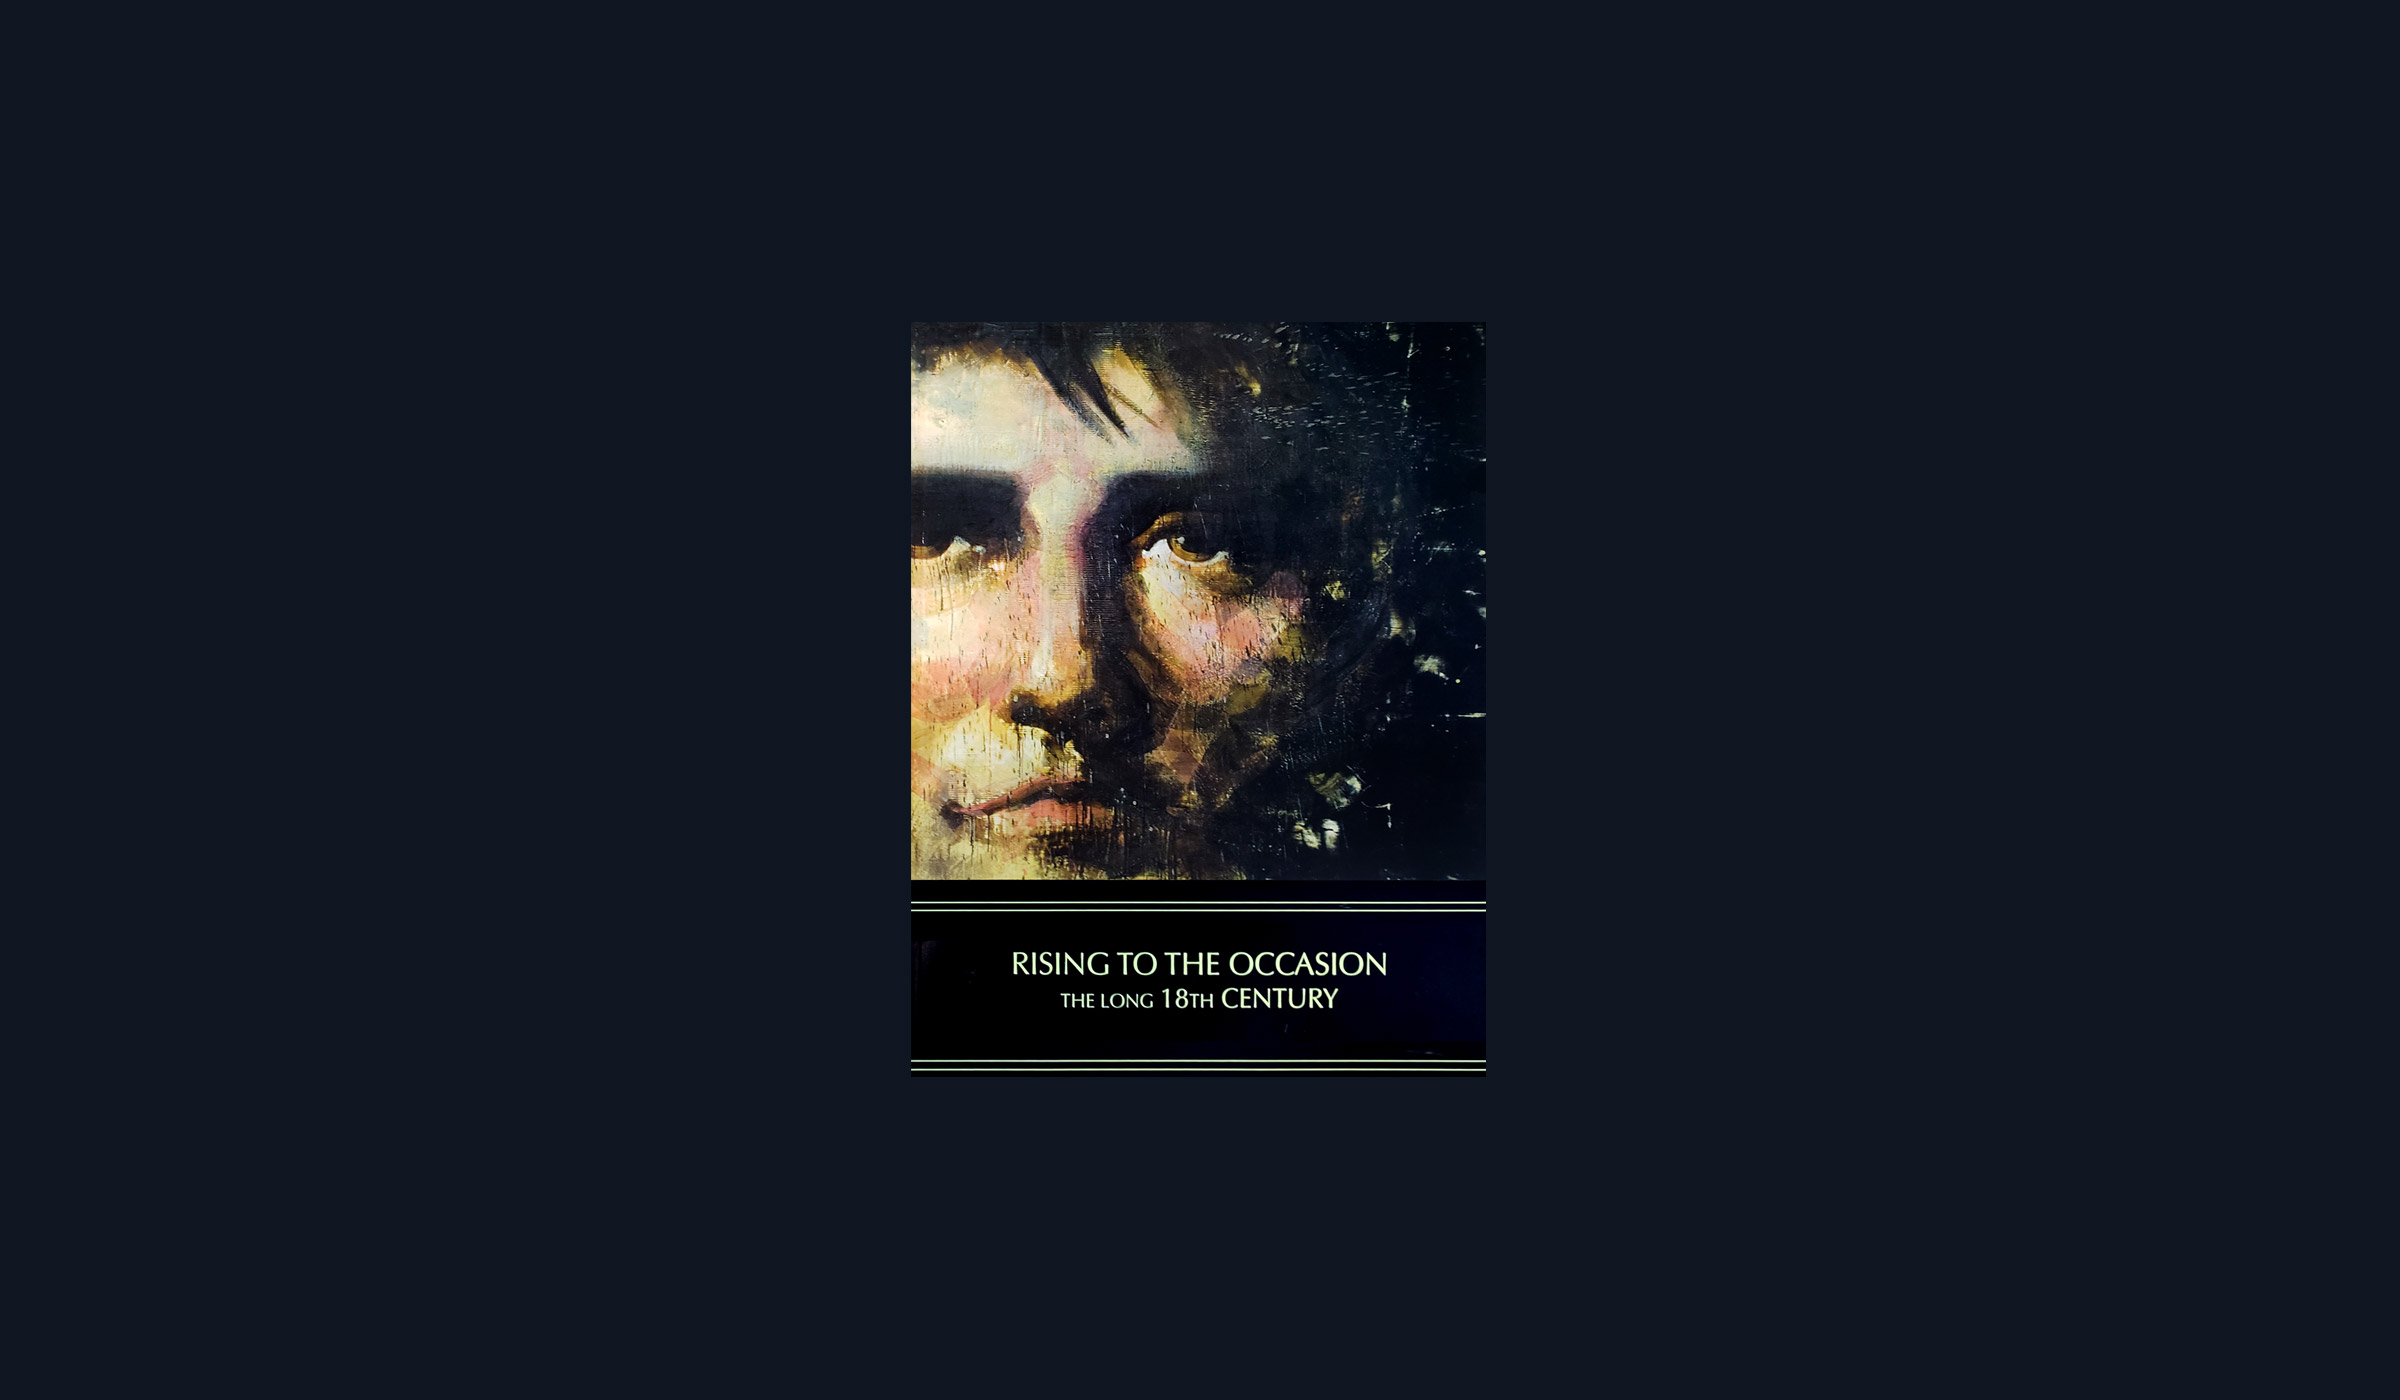 Book cover - portrait of a man's face above the book title